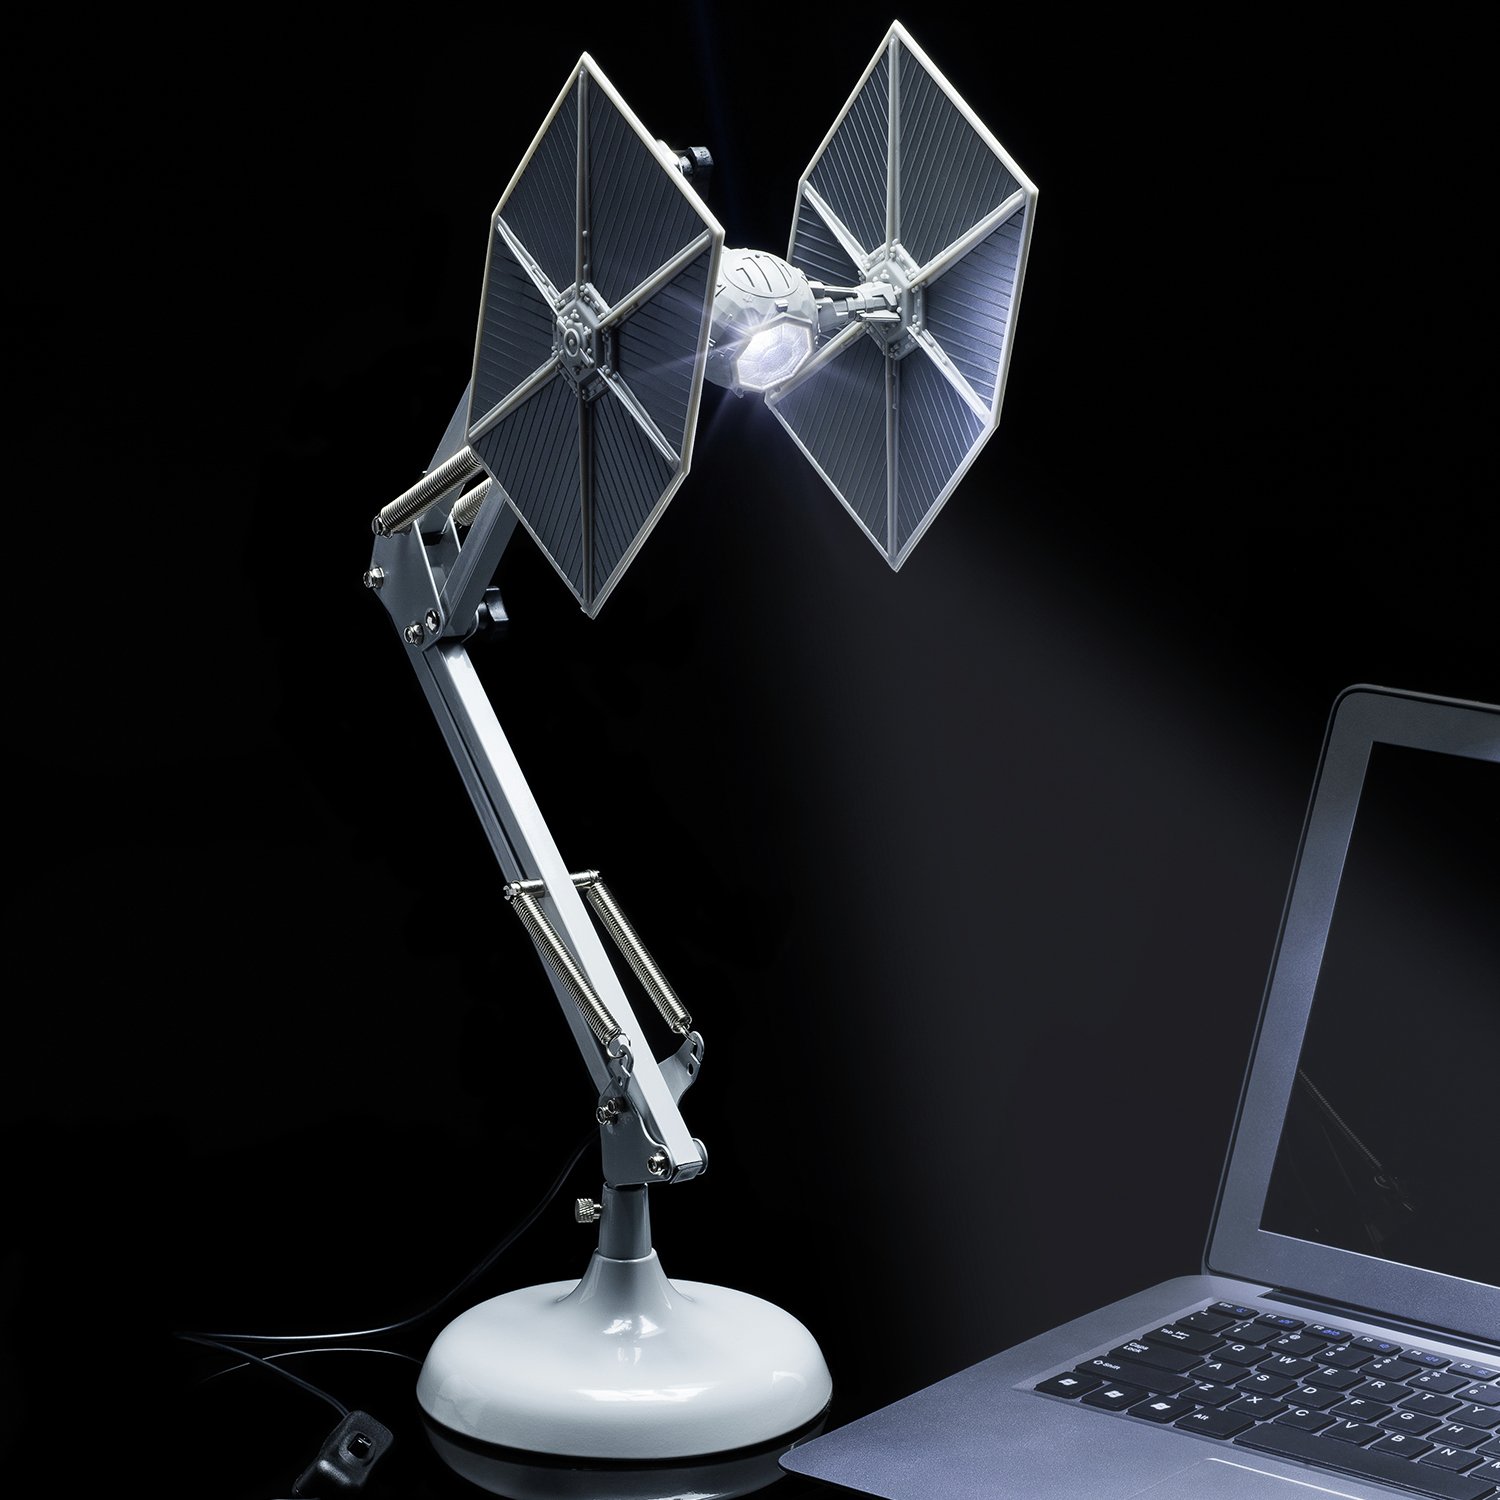 Star Wars TIE Fighter Posable Desk Lamp review